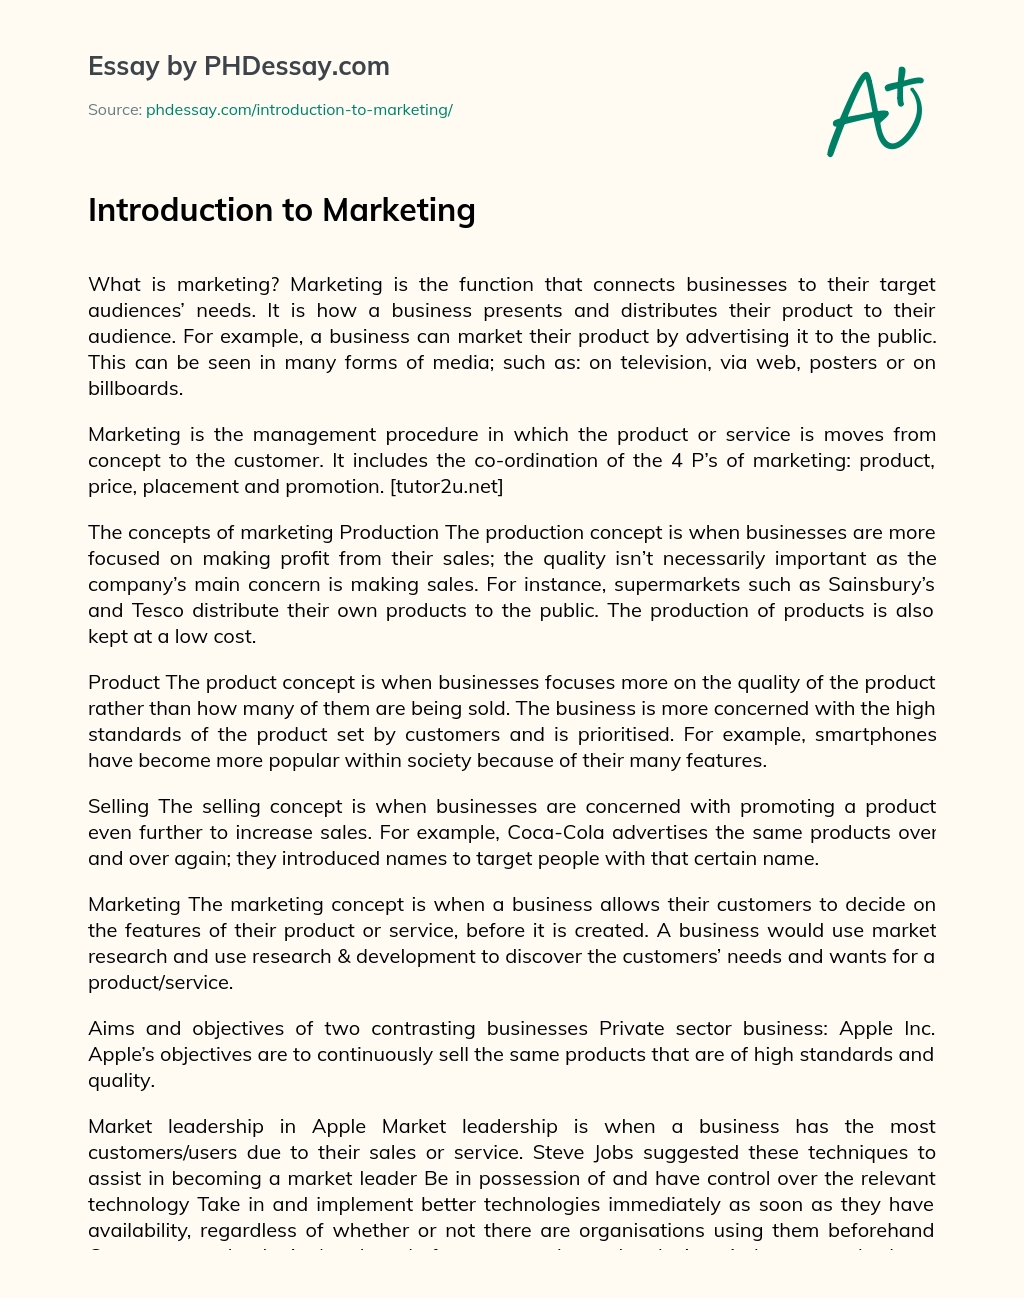 Реферат: Marketing Paper Essay Research Paper Introduction